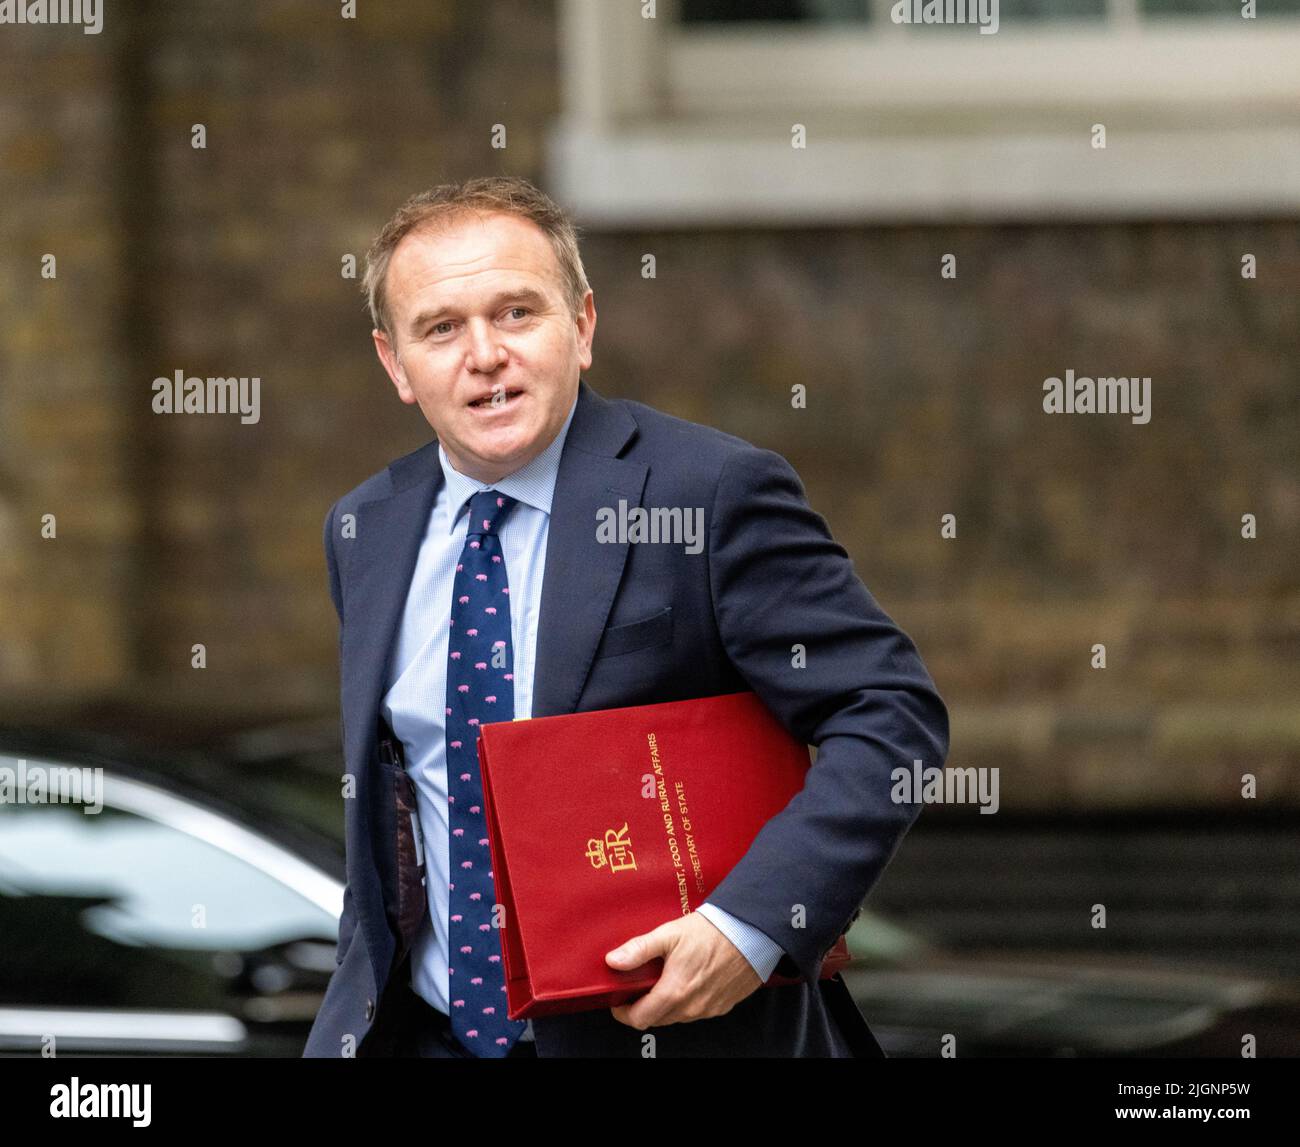 London, UK. 12th July, 2022. George Eustice, Environment Secretary, arrives at a cabinet meeting at 10 Downing Street London. Credit: Ian Davidson/Alamy Live News Stock Photo